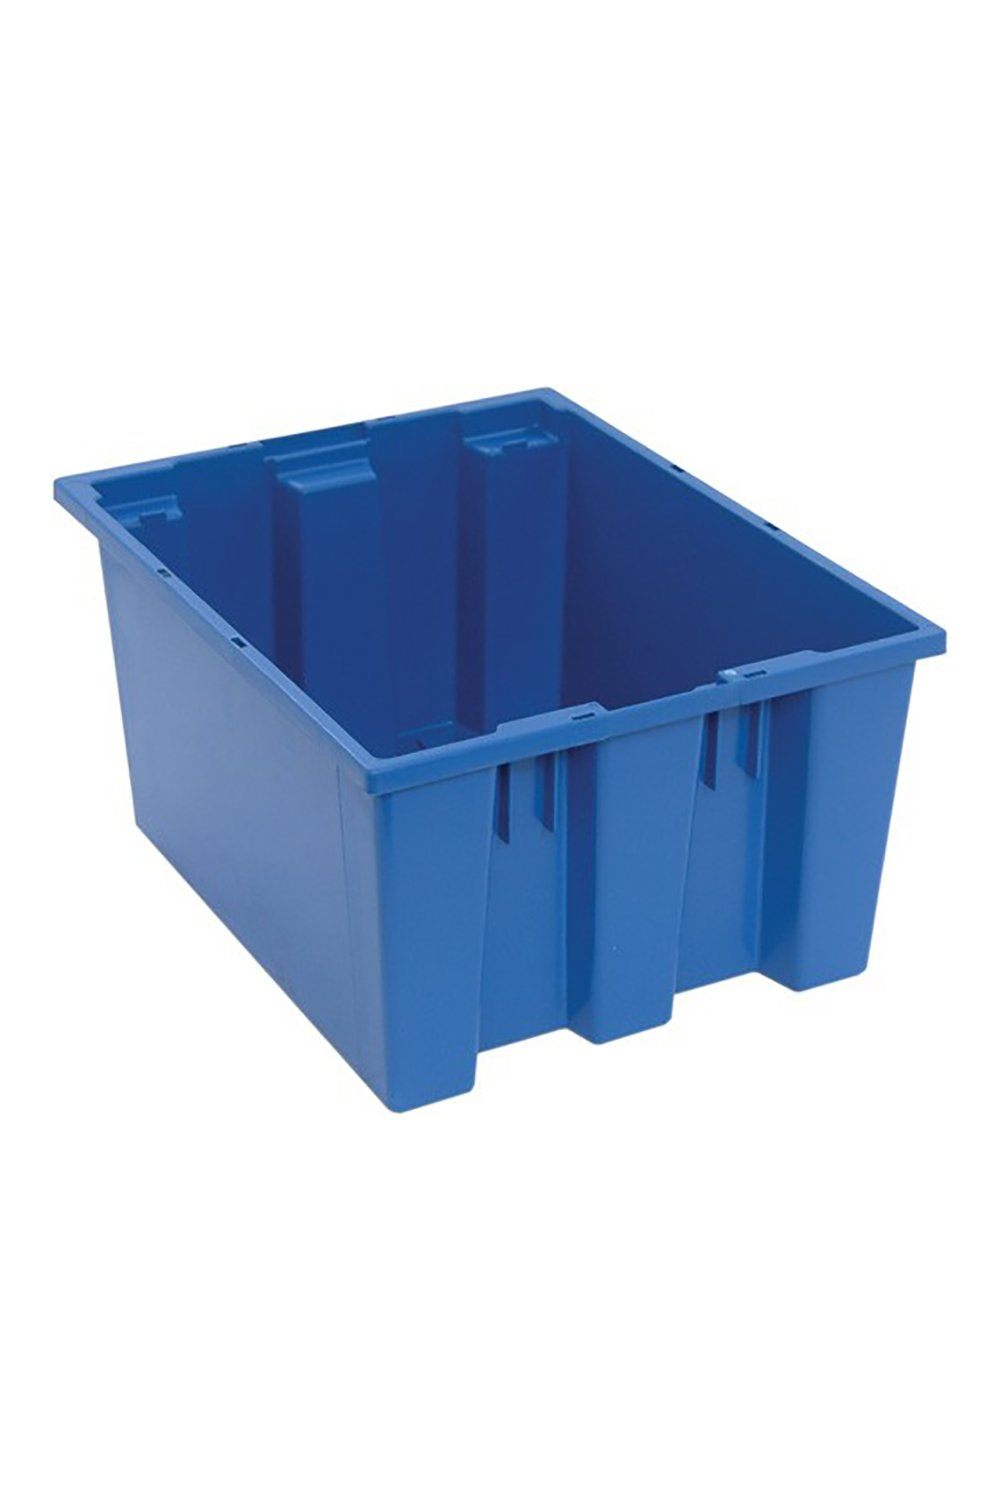 Stack and Nest Tote Bins & Containers Acart 19-1/2"L x 15-1/2"W x 10"H Blue 